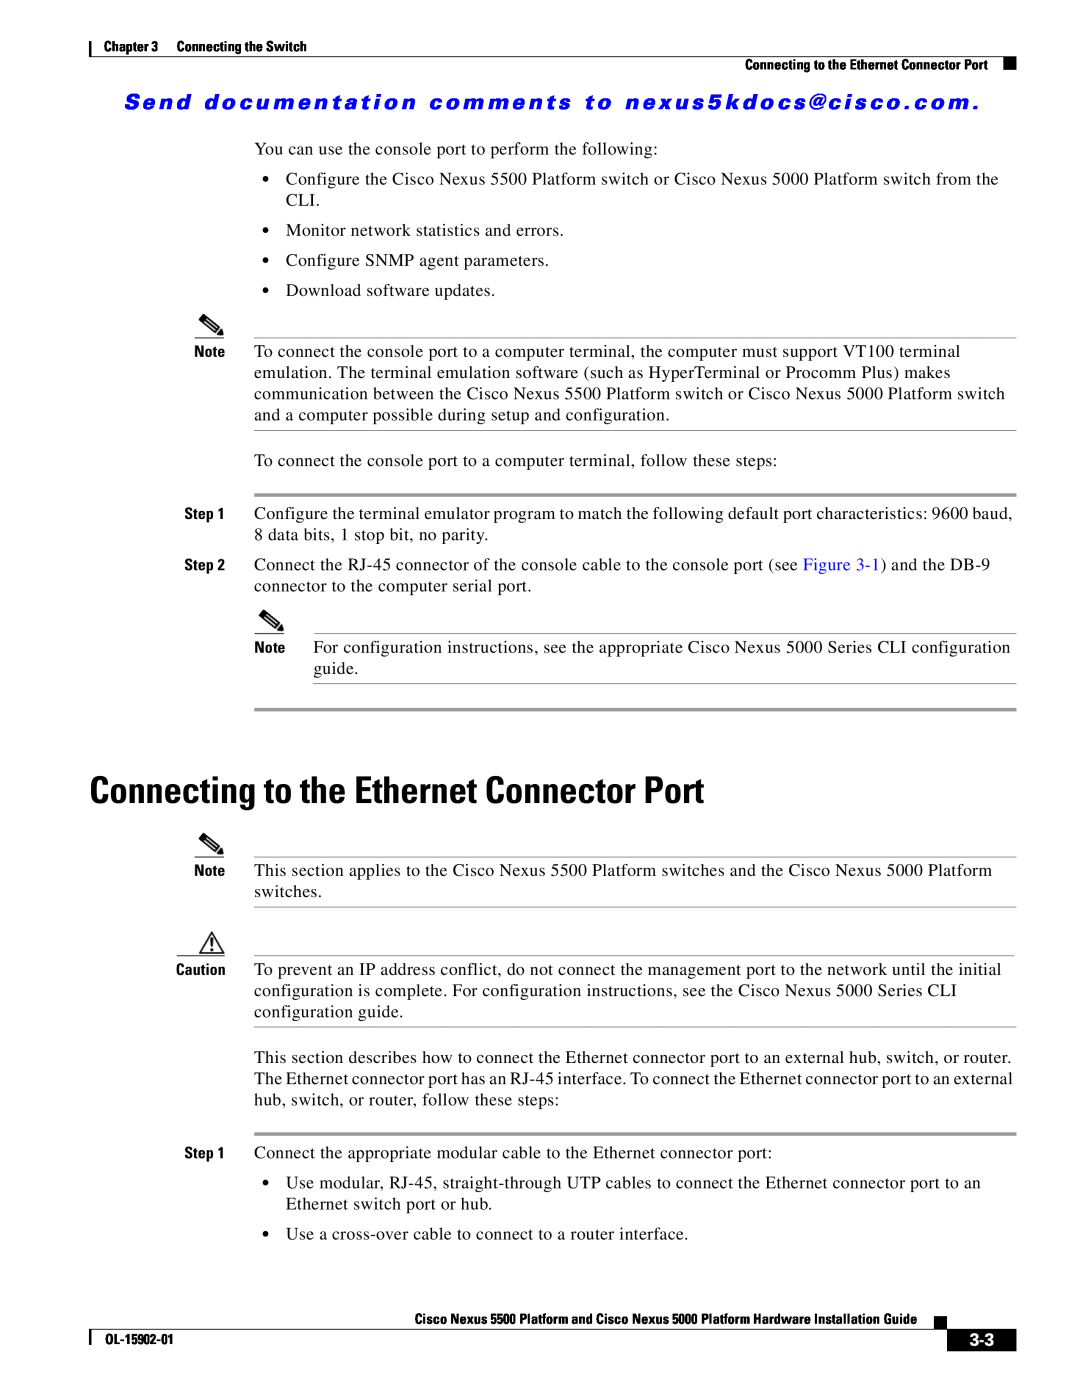 Cisco Systems 5000 manual Connecting to the Ethernet Connector Port 